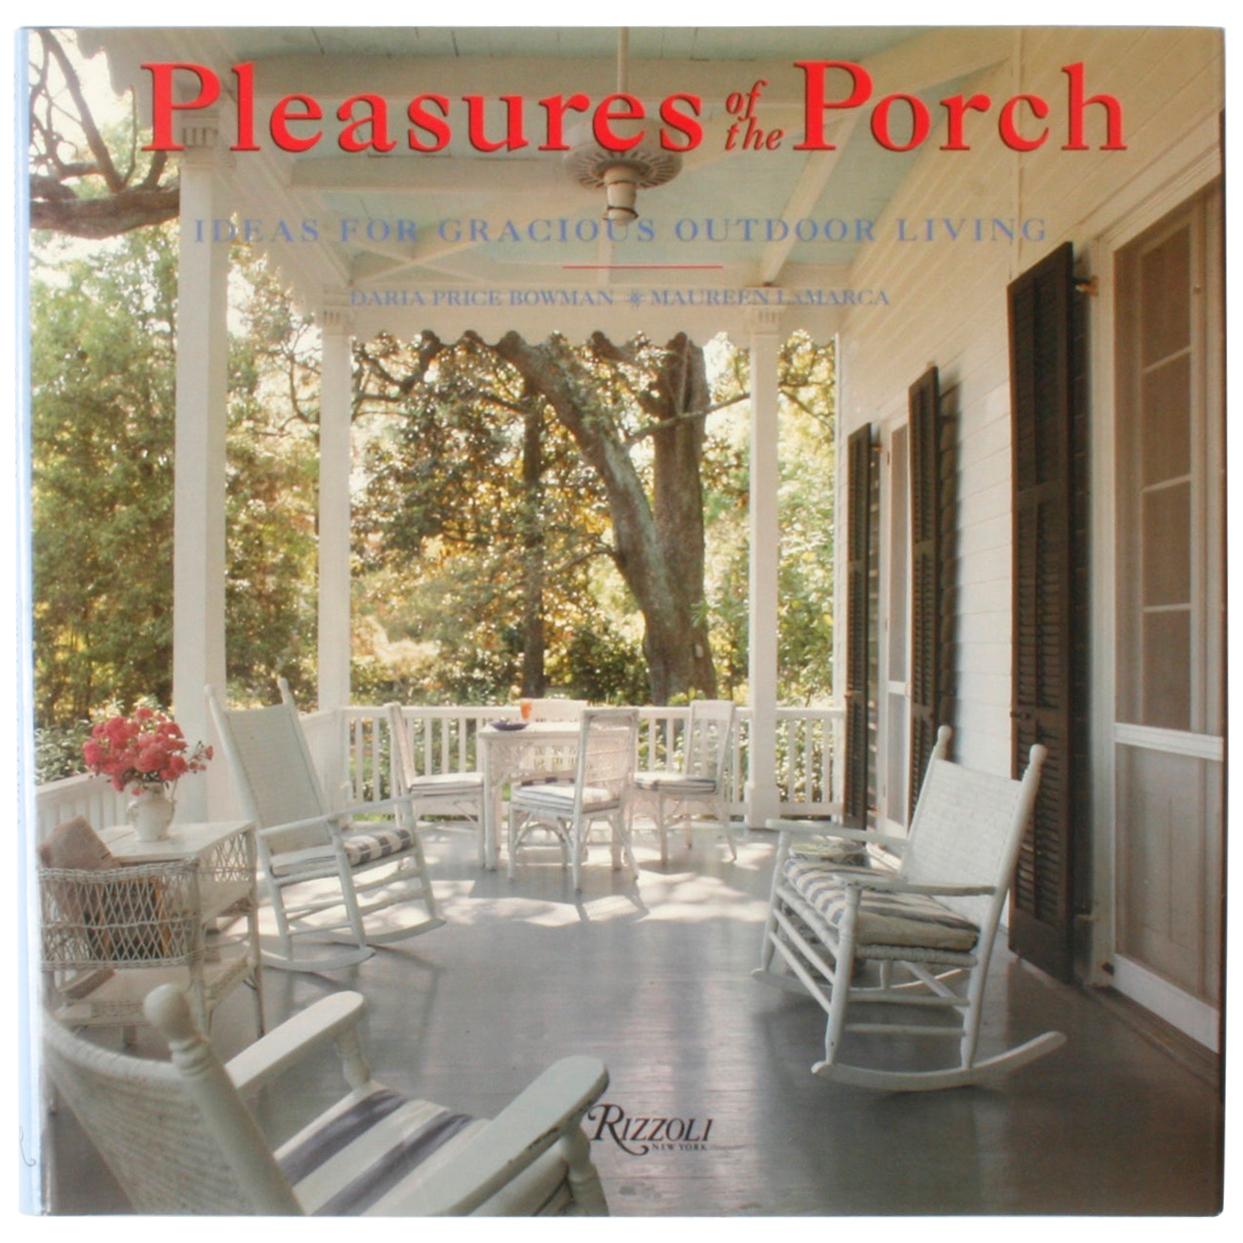 Pleasures of the Porch by Daria Price Bowman & Maureen LaMarca First Edition